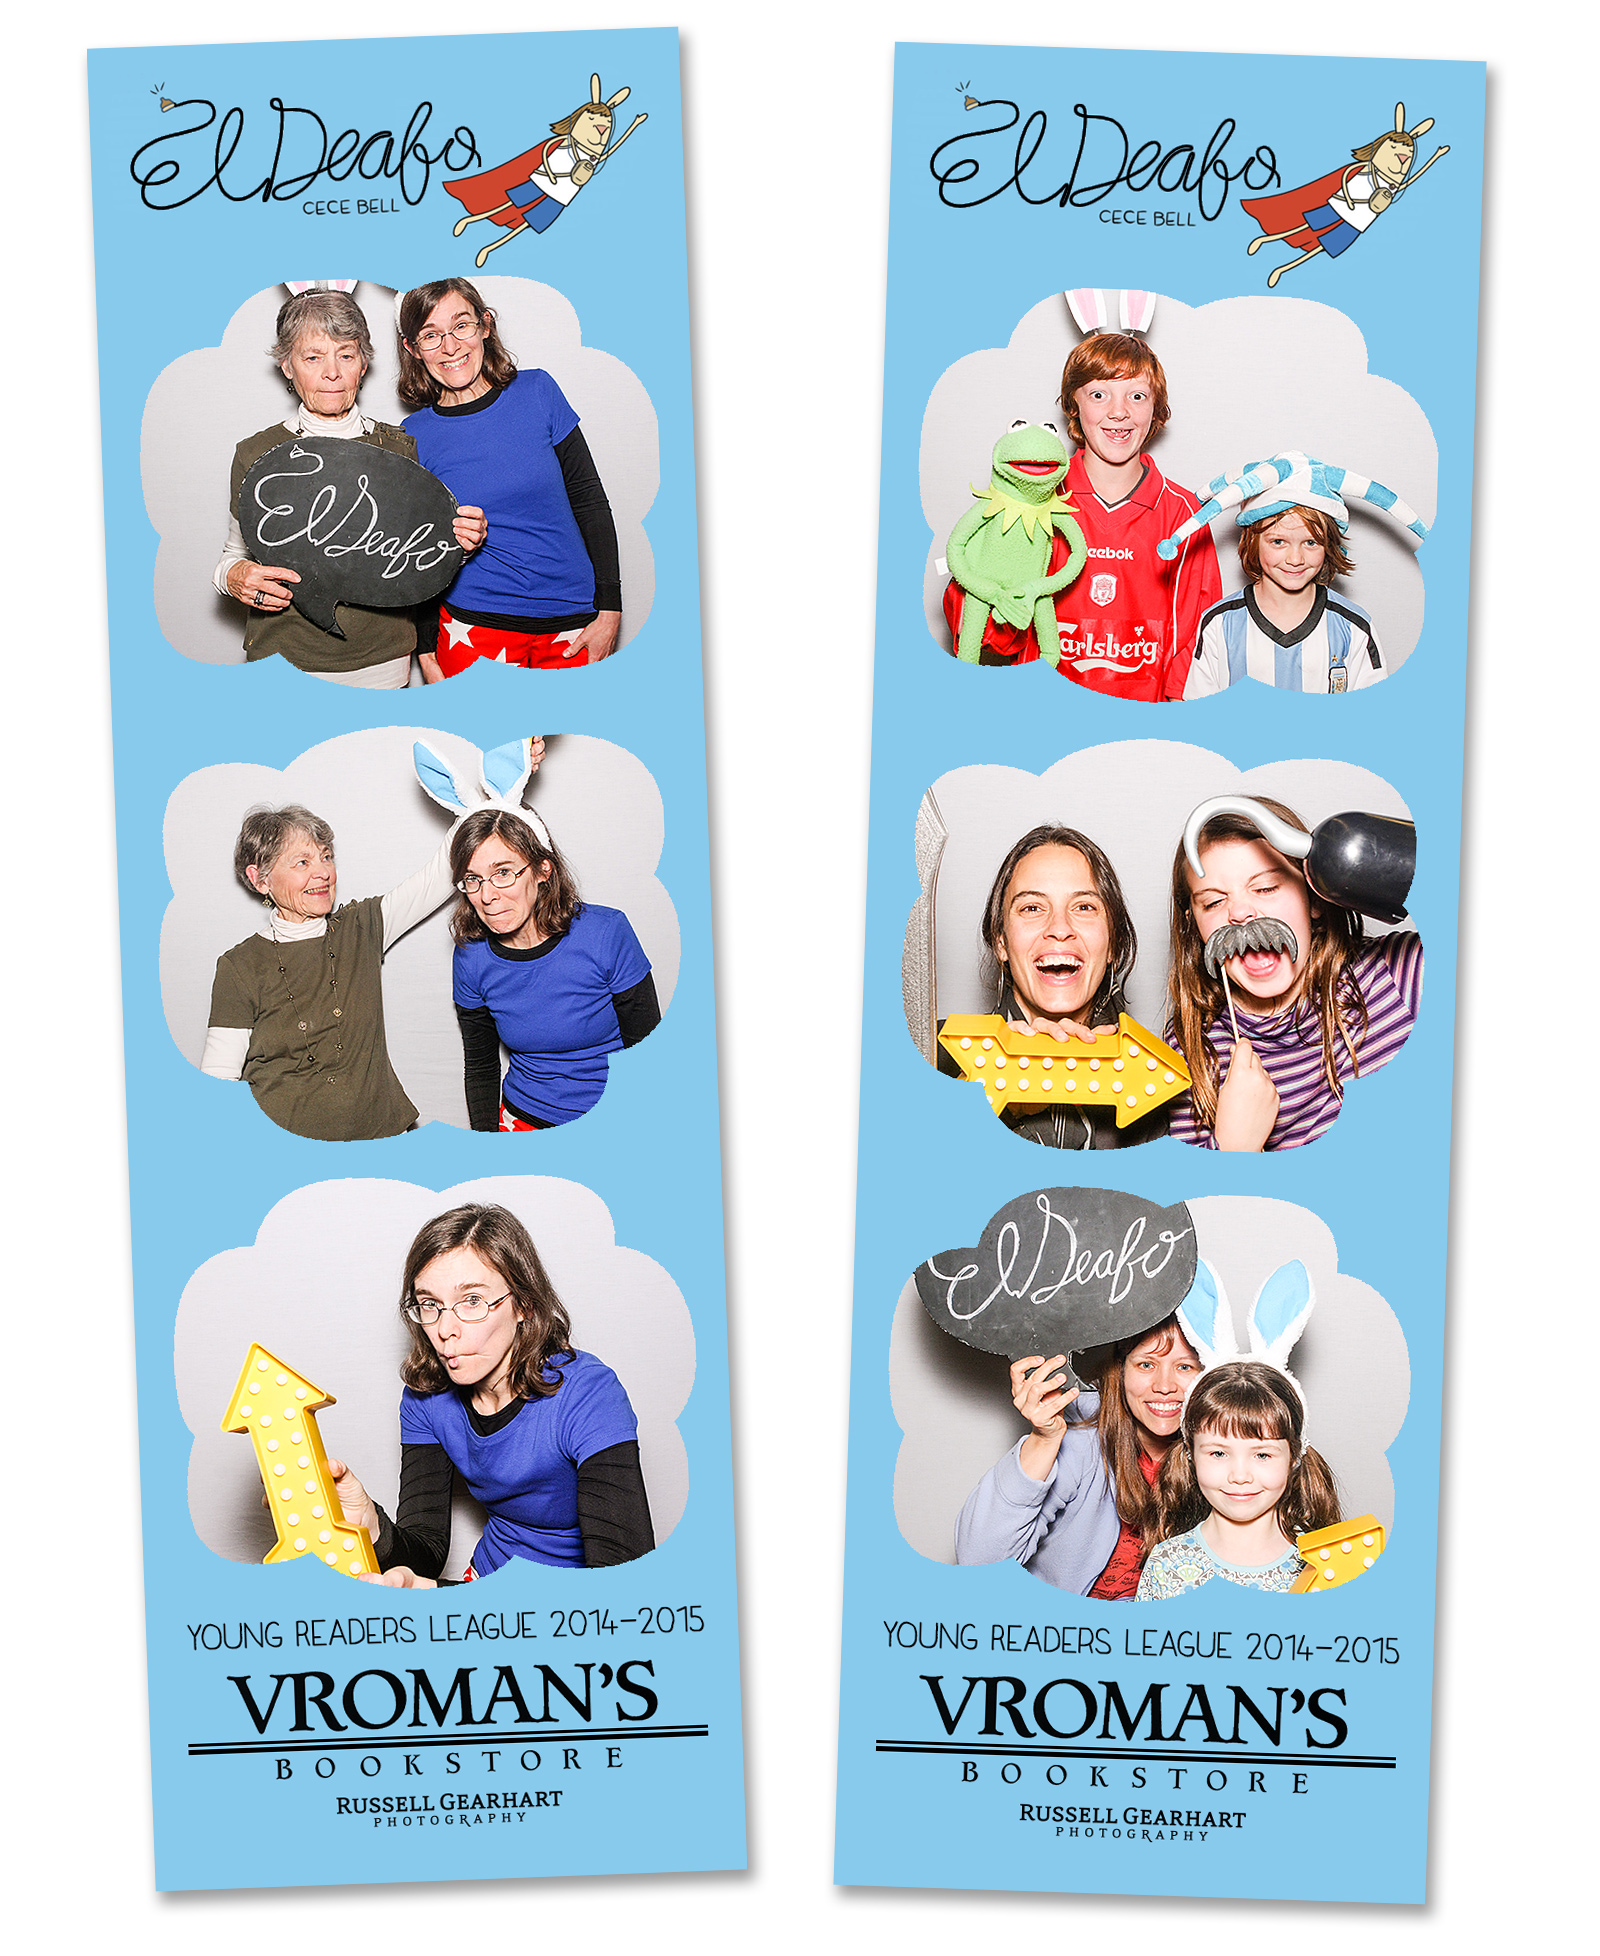 Pasadena Photobooth: El Deafo Book Event at Vroman’s Bookstore – Russell Gearhart Photography – www.gearhartphoto.com